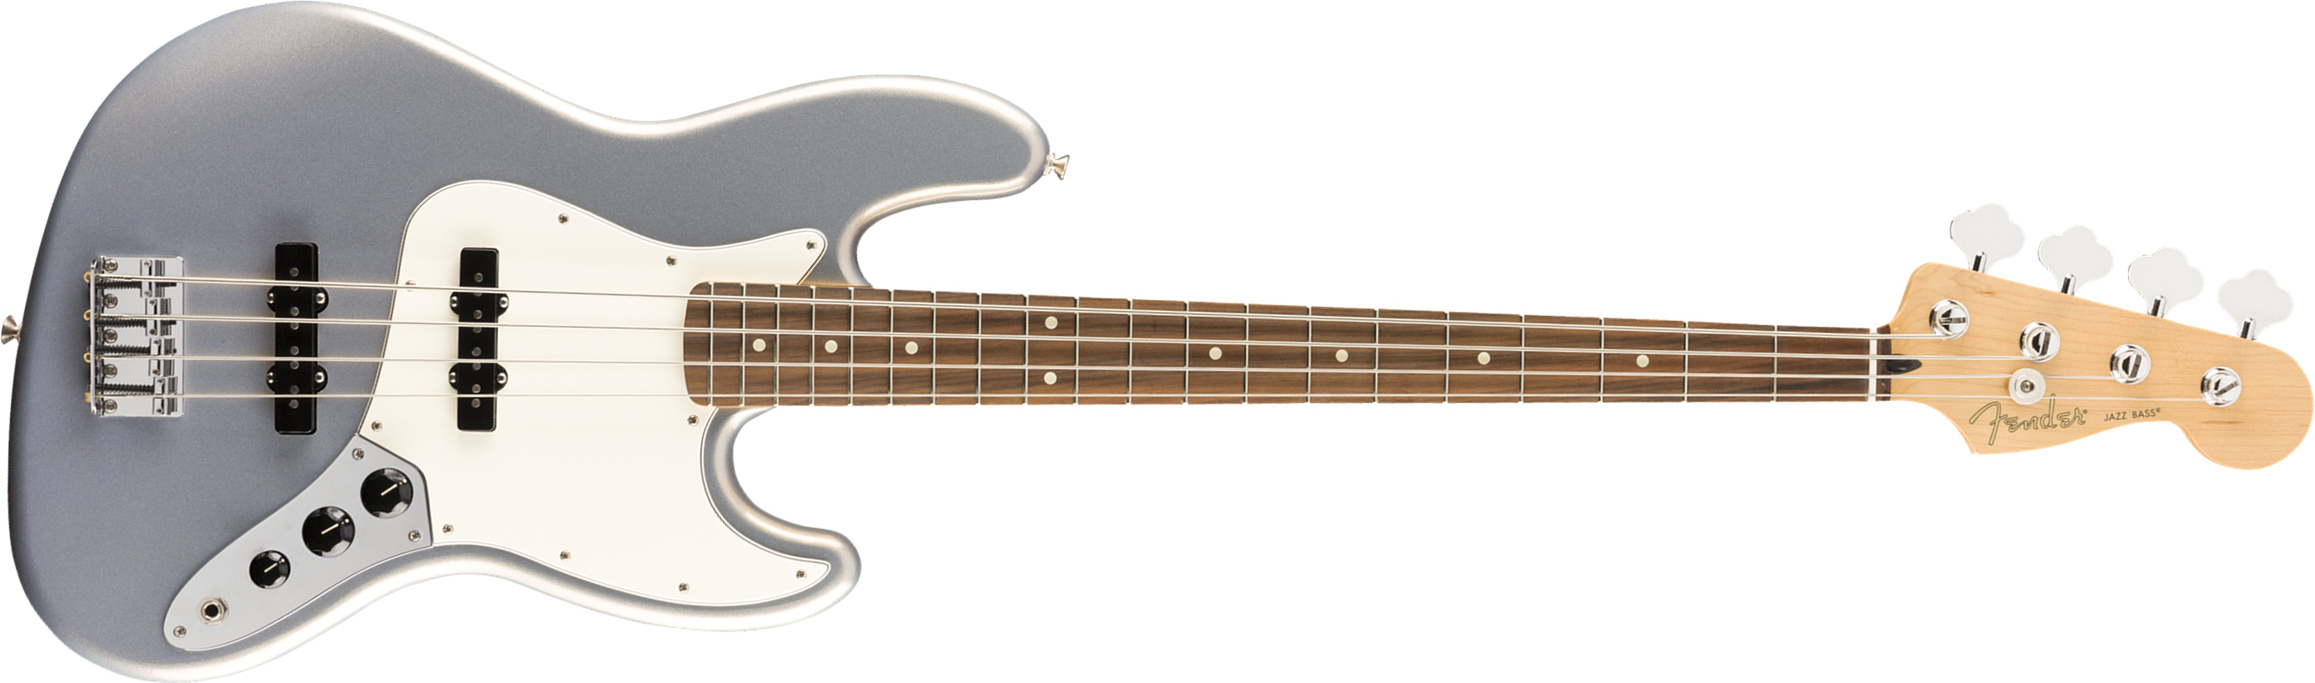 Fender Jazz Bass Player Mex Pf - Silver - Basse Électrique Solid Body - Main picture